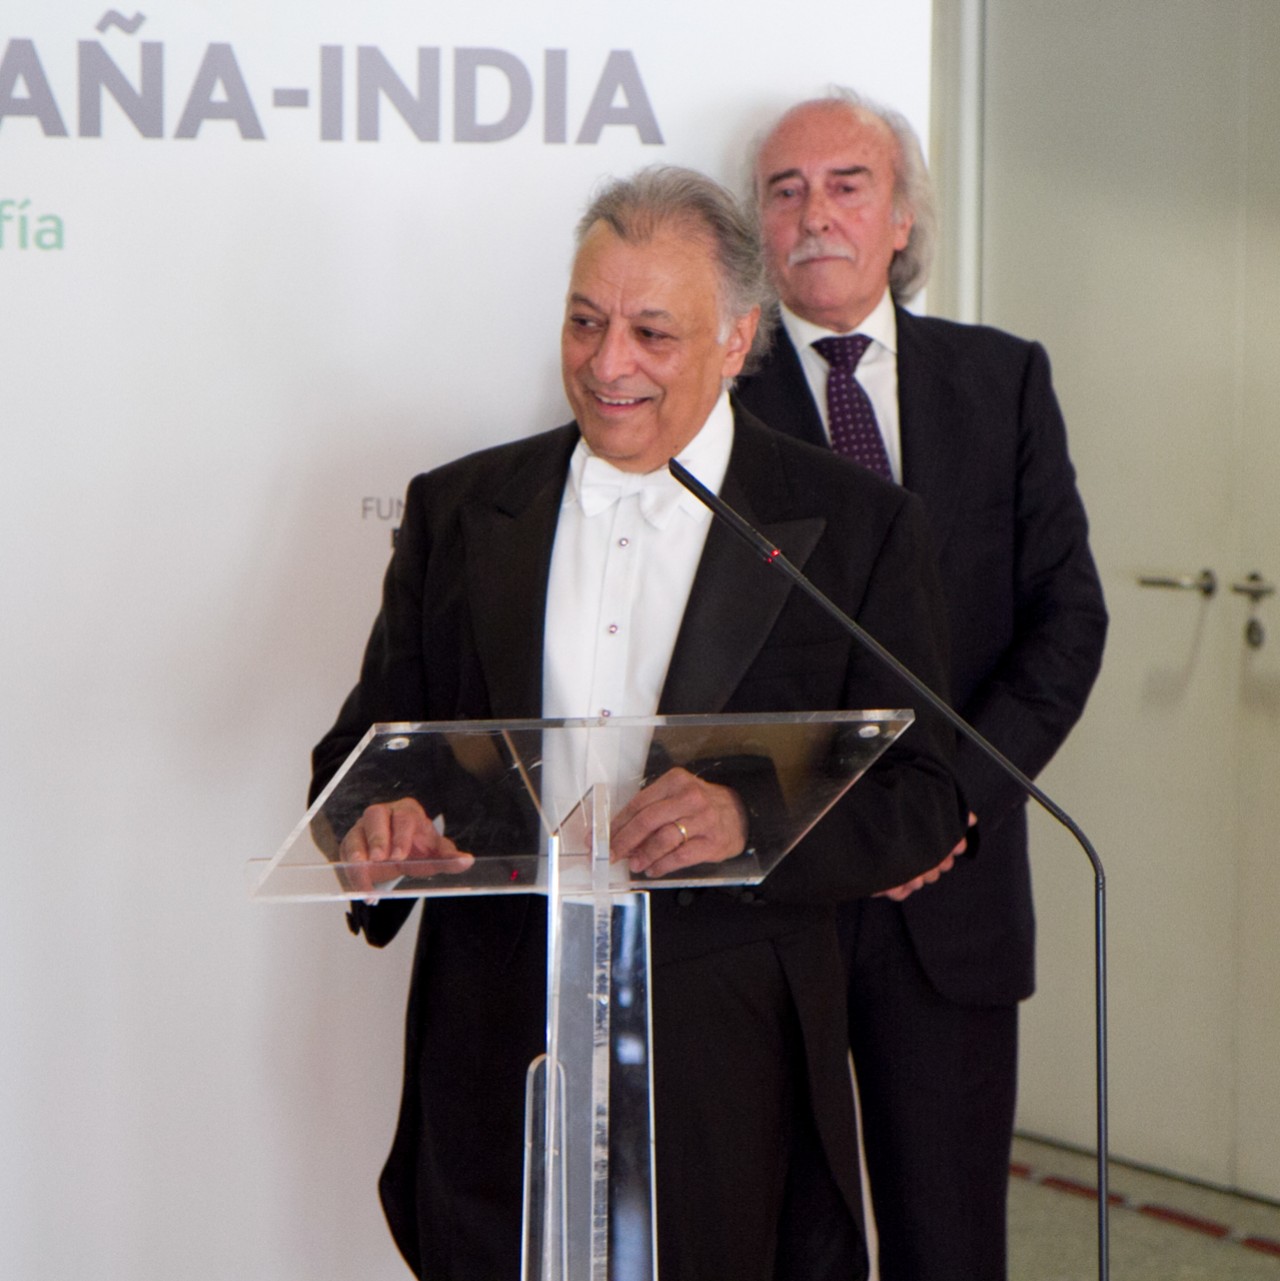 Zubin Mehta, moved by the 1st SICF Award